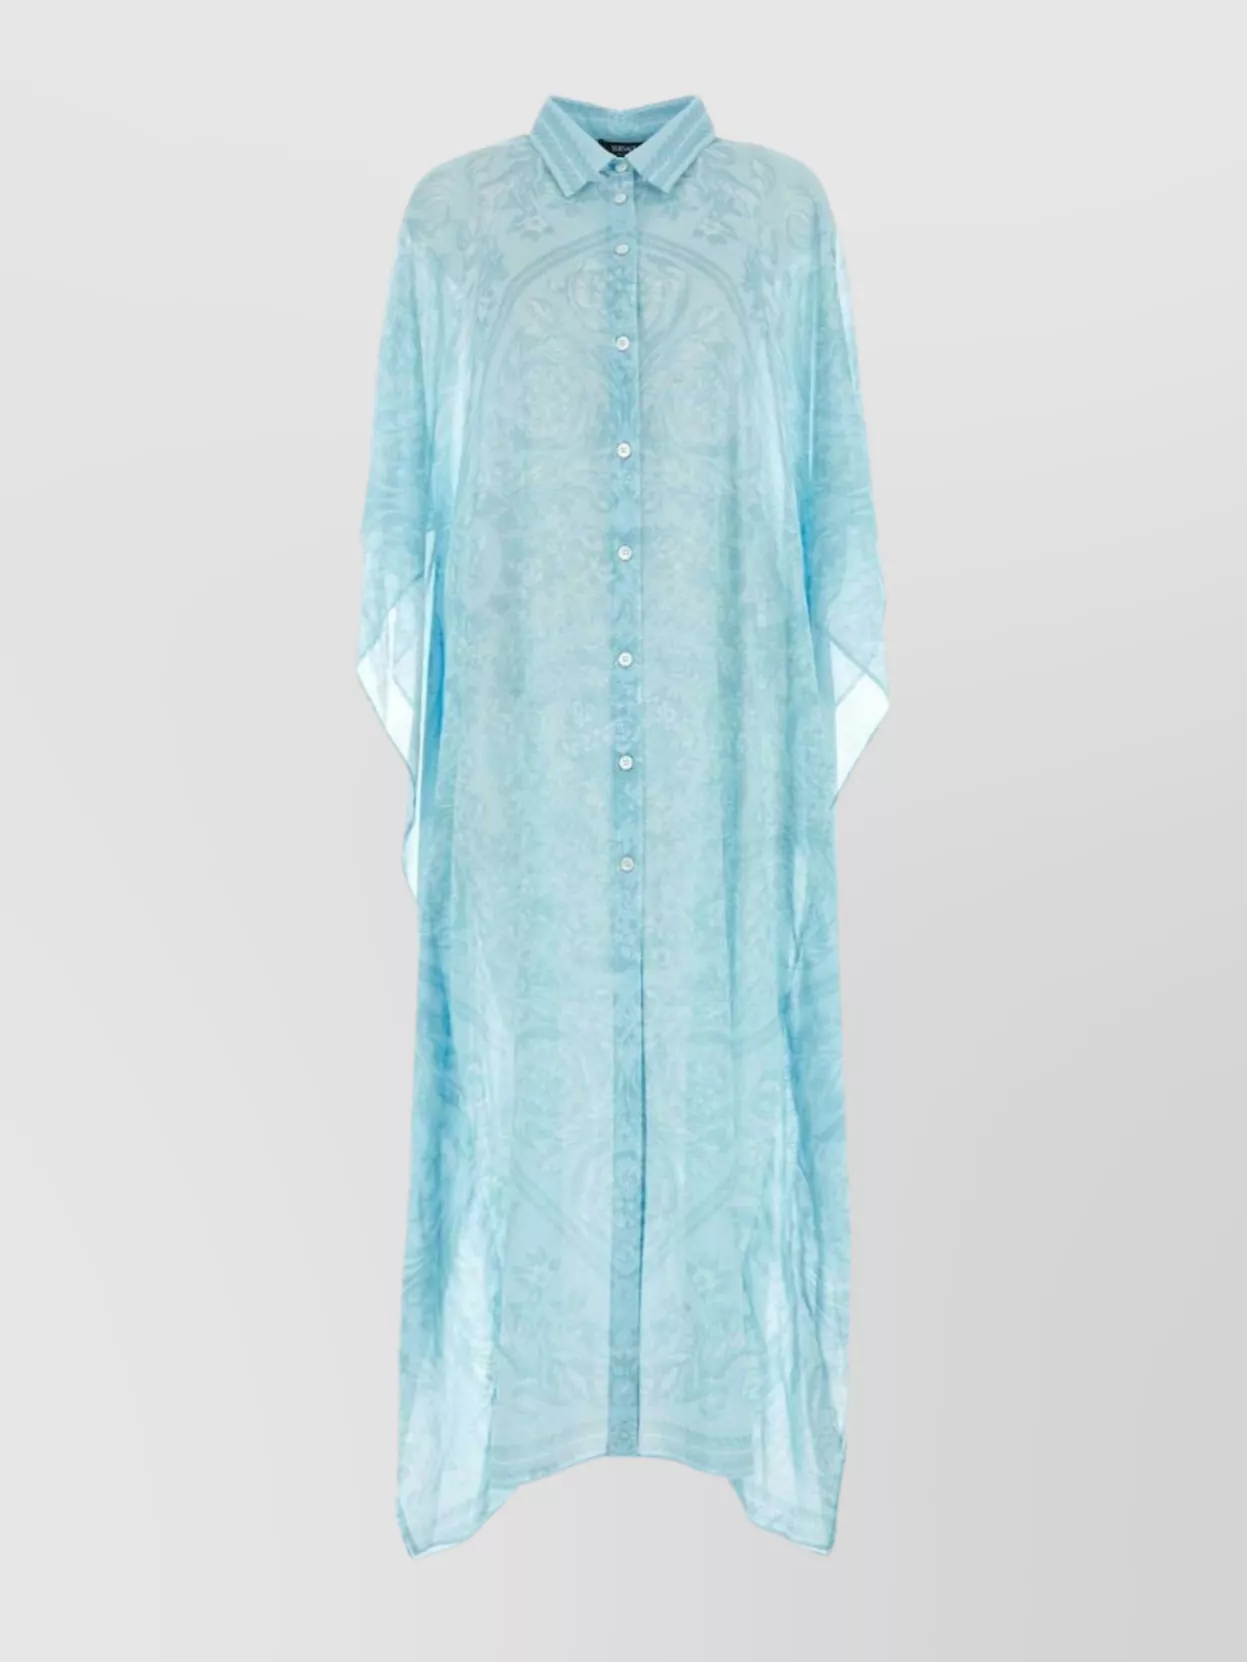 Versace Printed Design Sheer Chiffon Cover-up In Blue